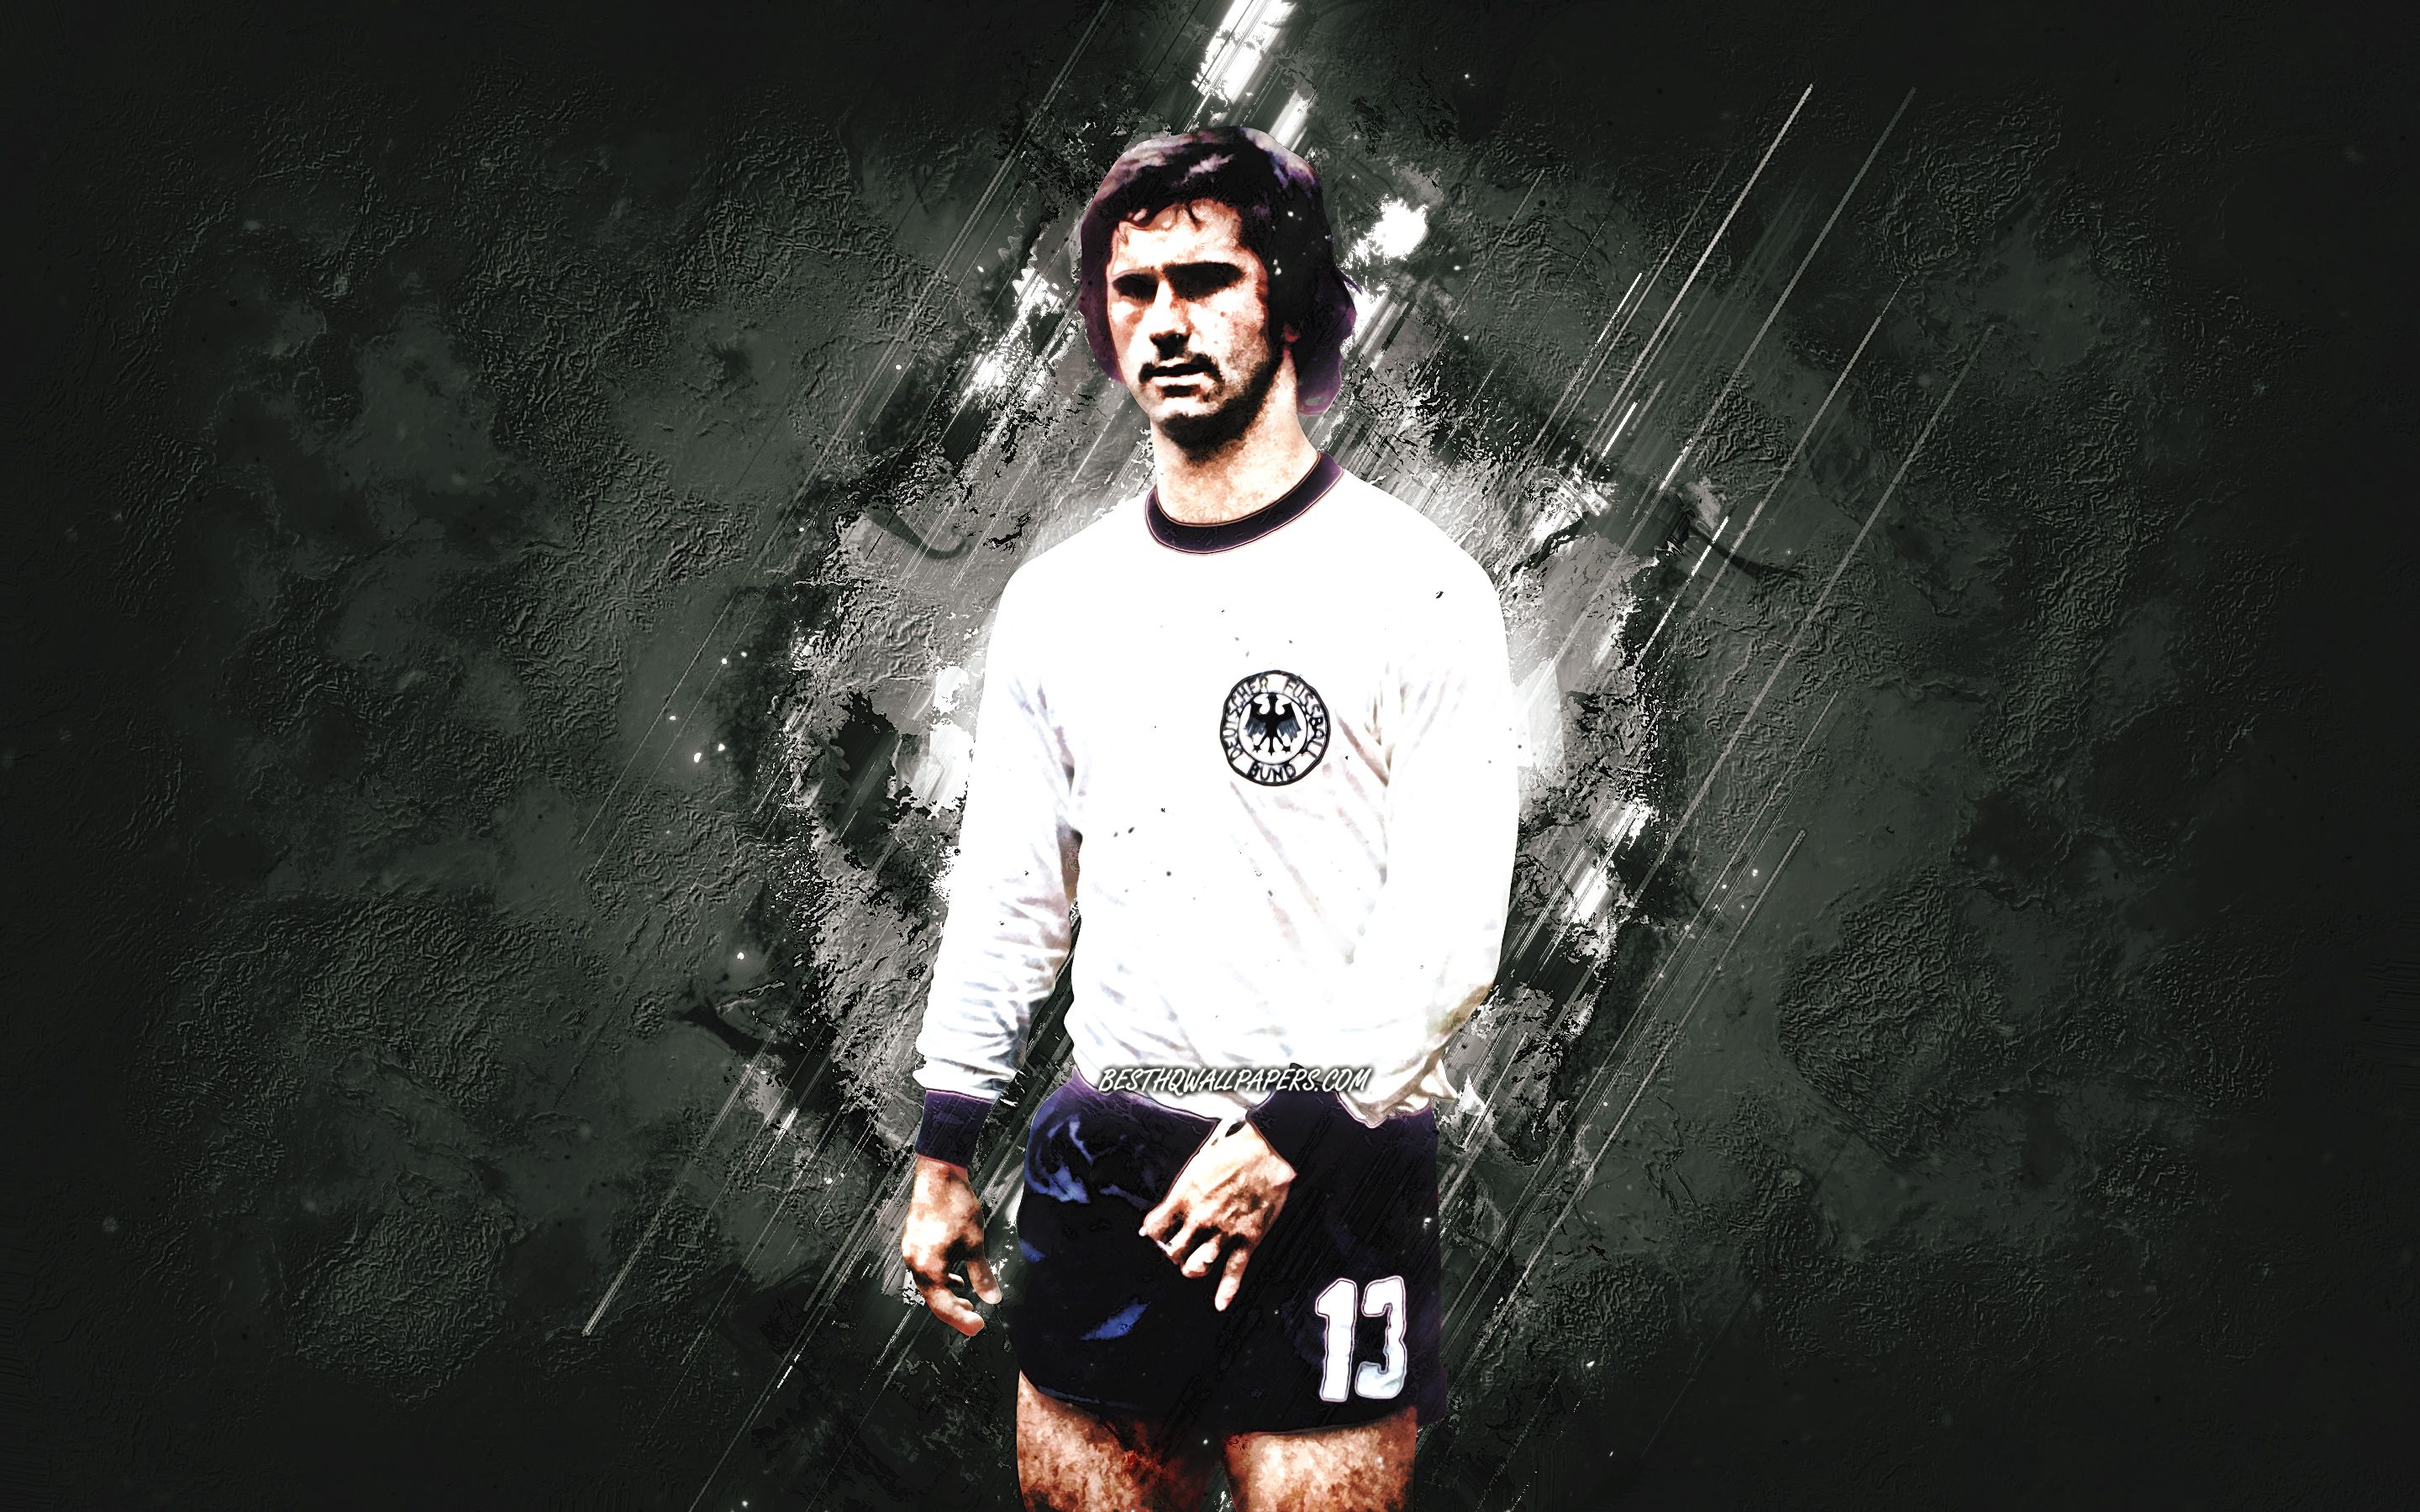 Download wallpaper Gerd Muller, Germany national football team, german footballer, portrait, football legends, gray stone background, football for desktop with resolution 2880x1800. High Quality HD picture wallpaper